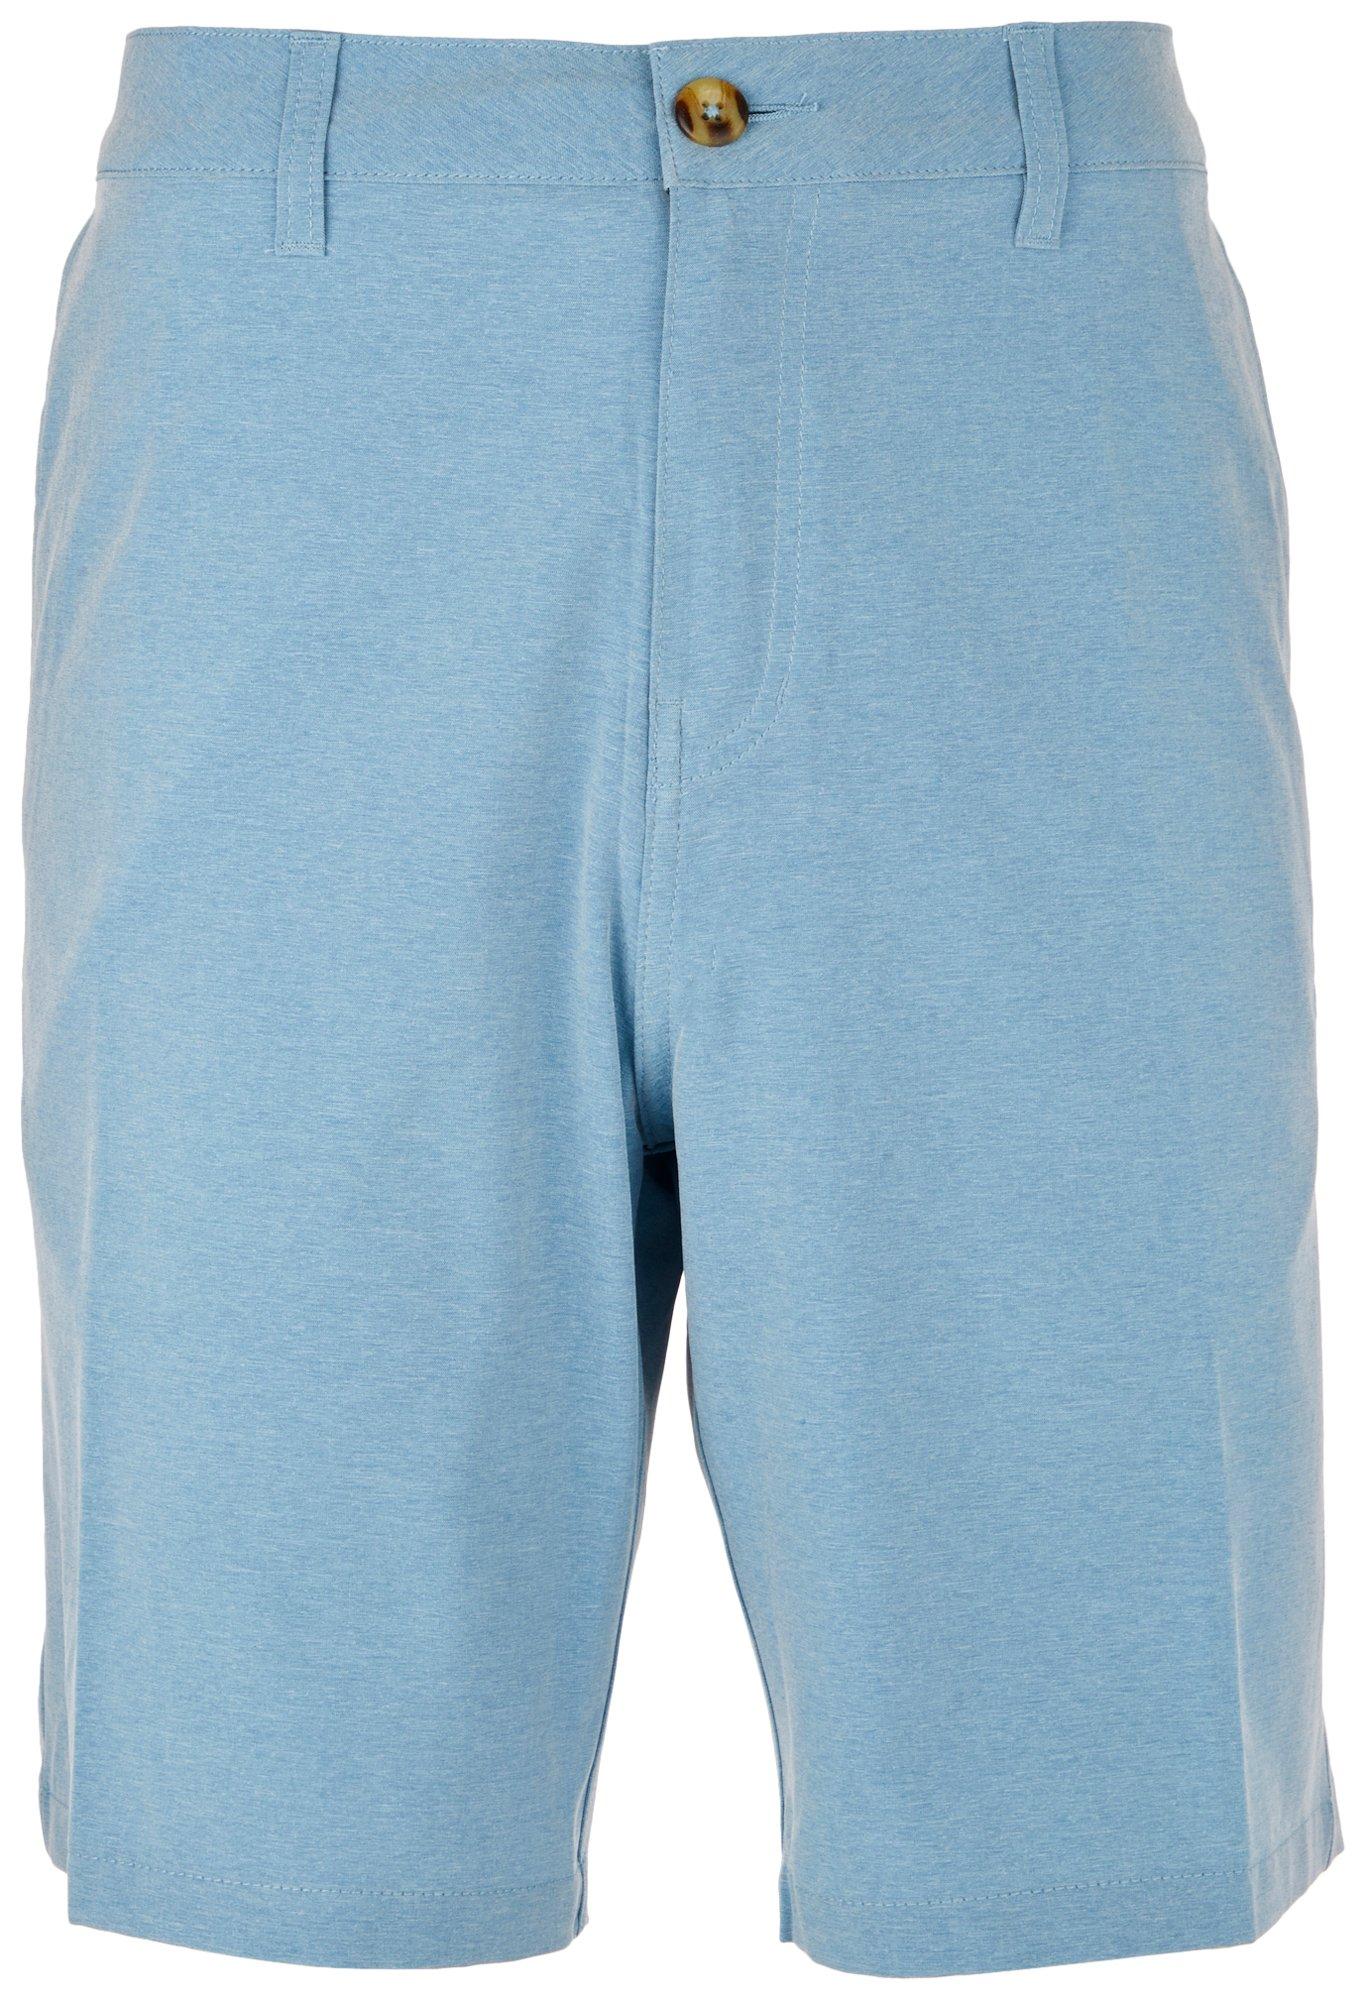 Mens 20.5 in. Union Heather Surf Or Walk Shorts